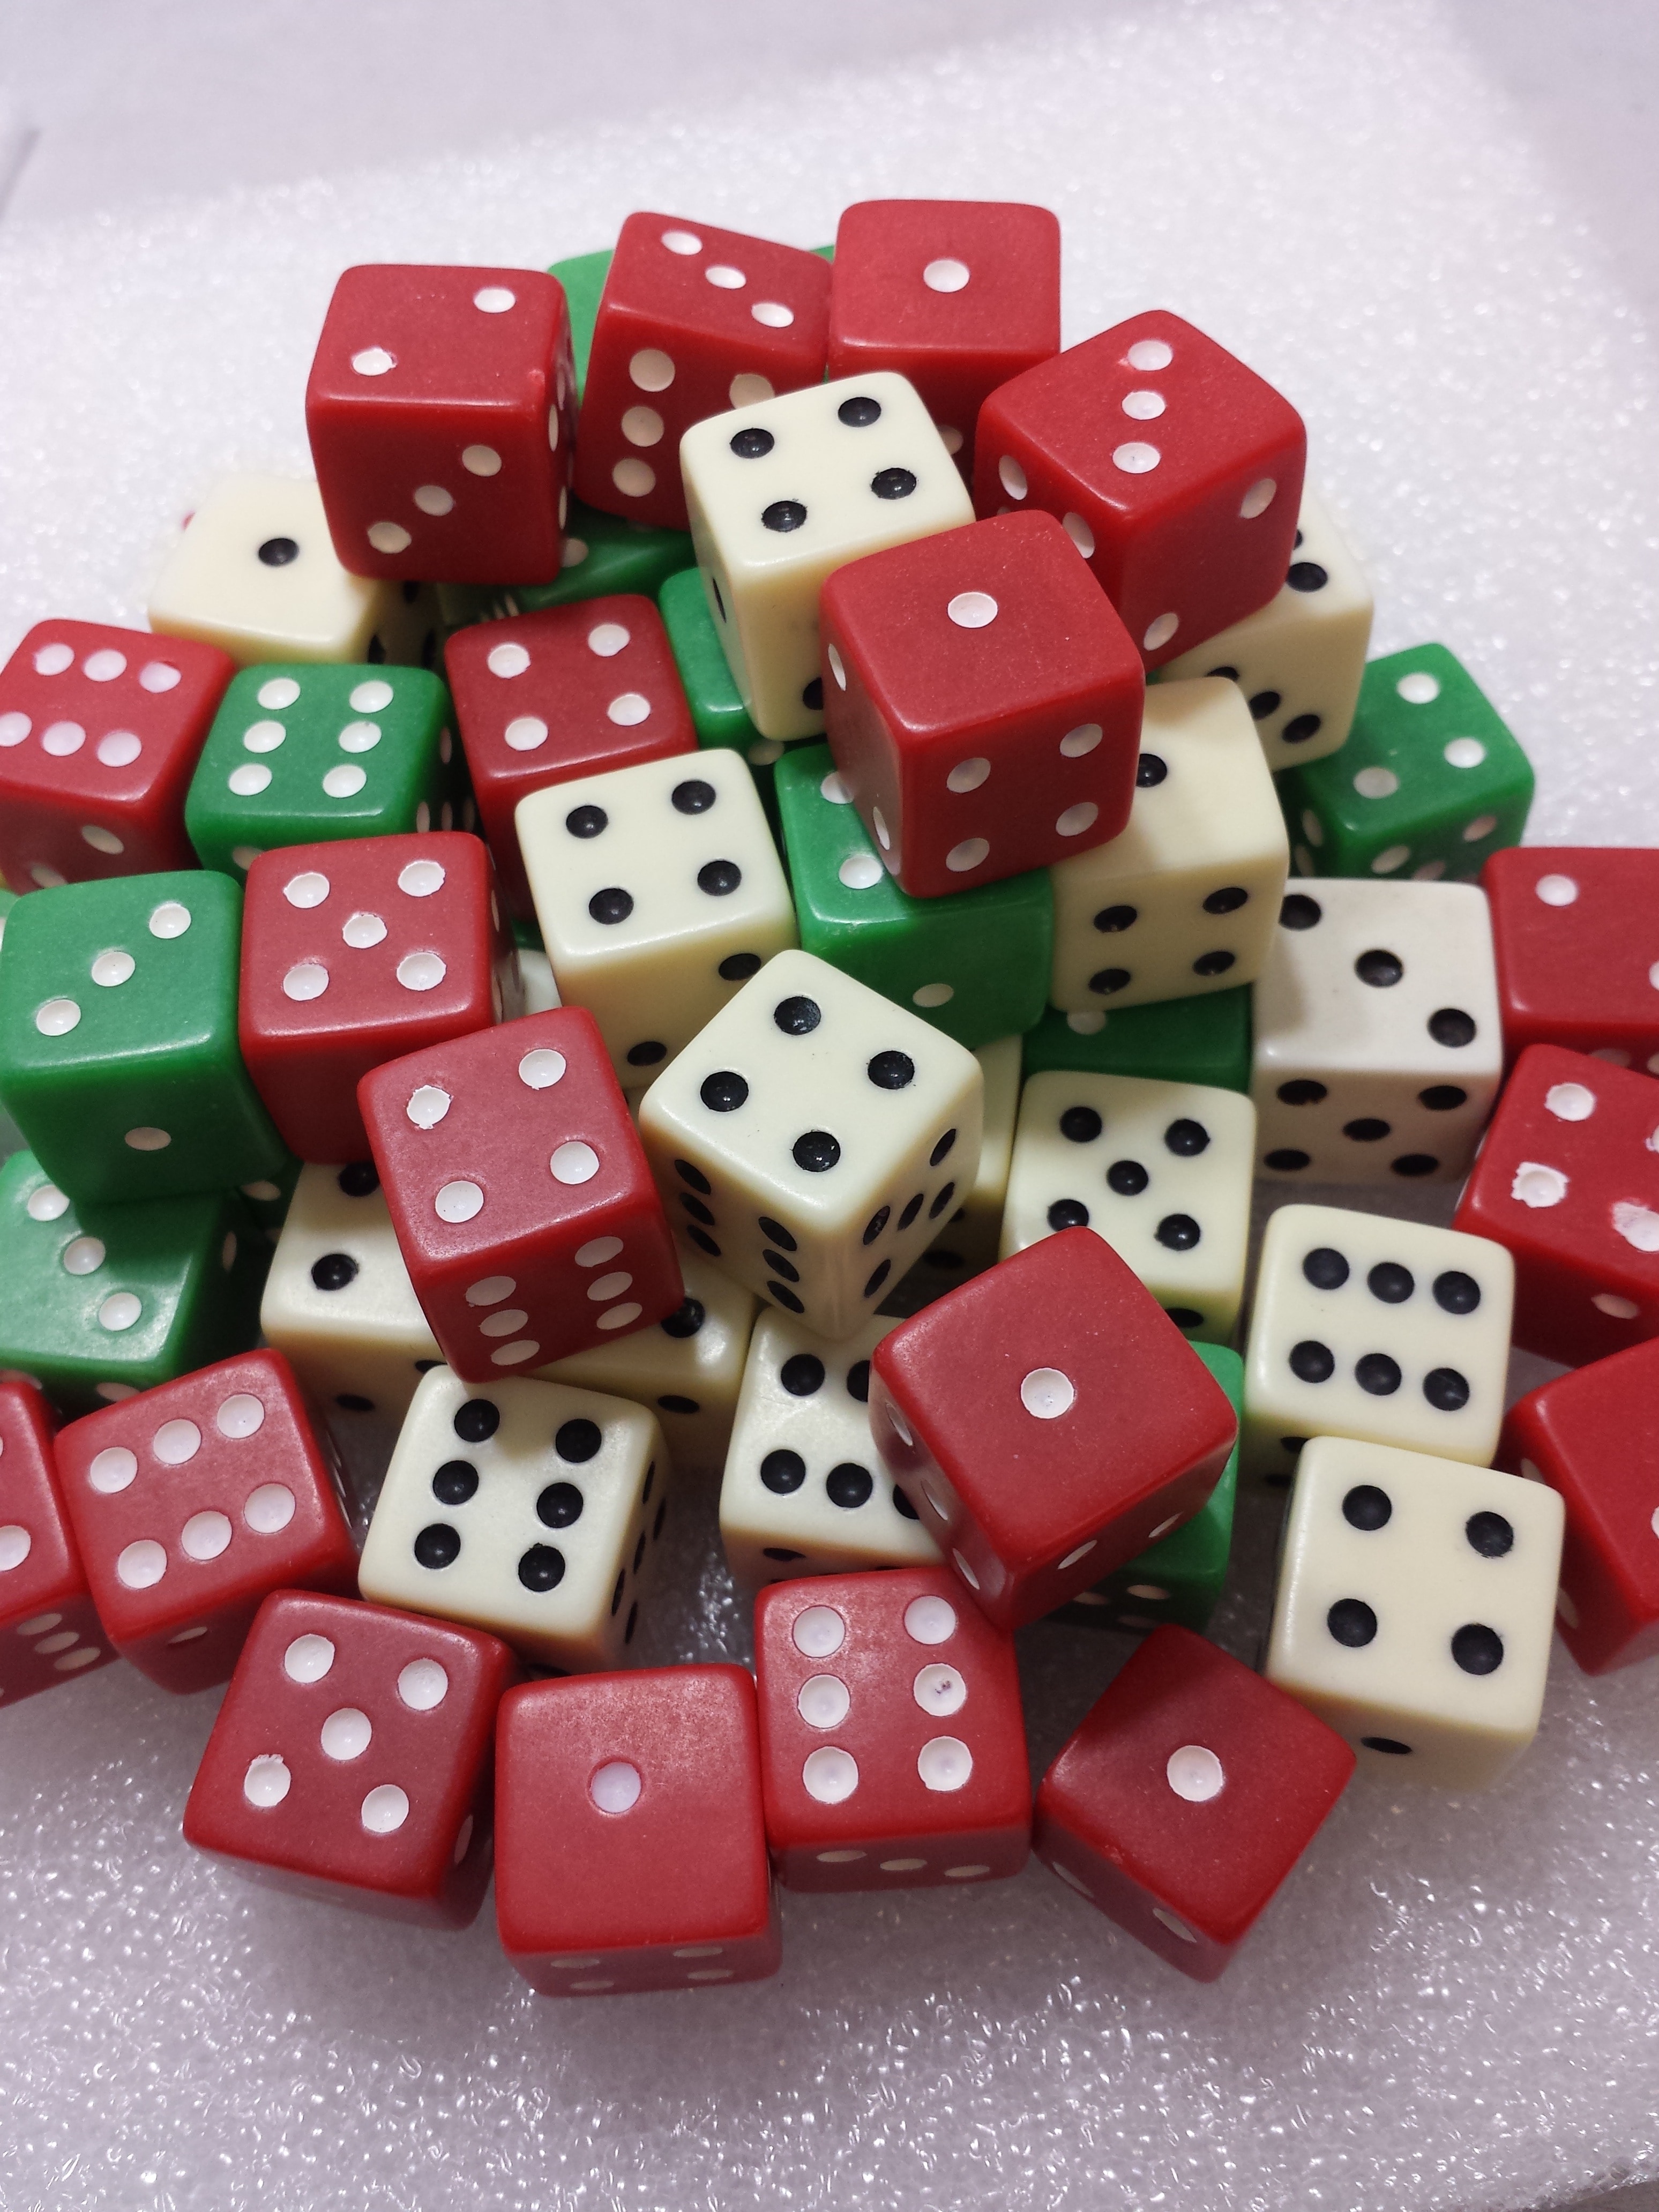 assorted colors dice lot